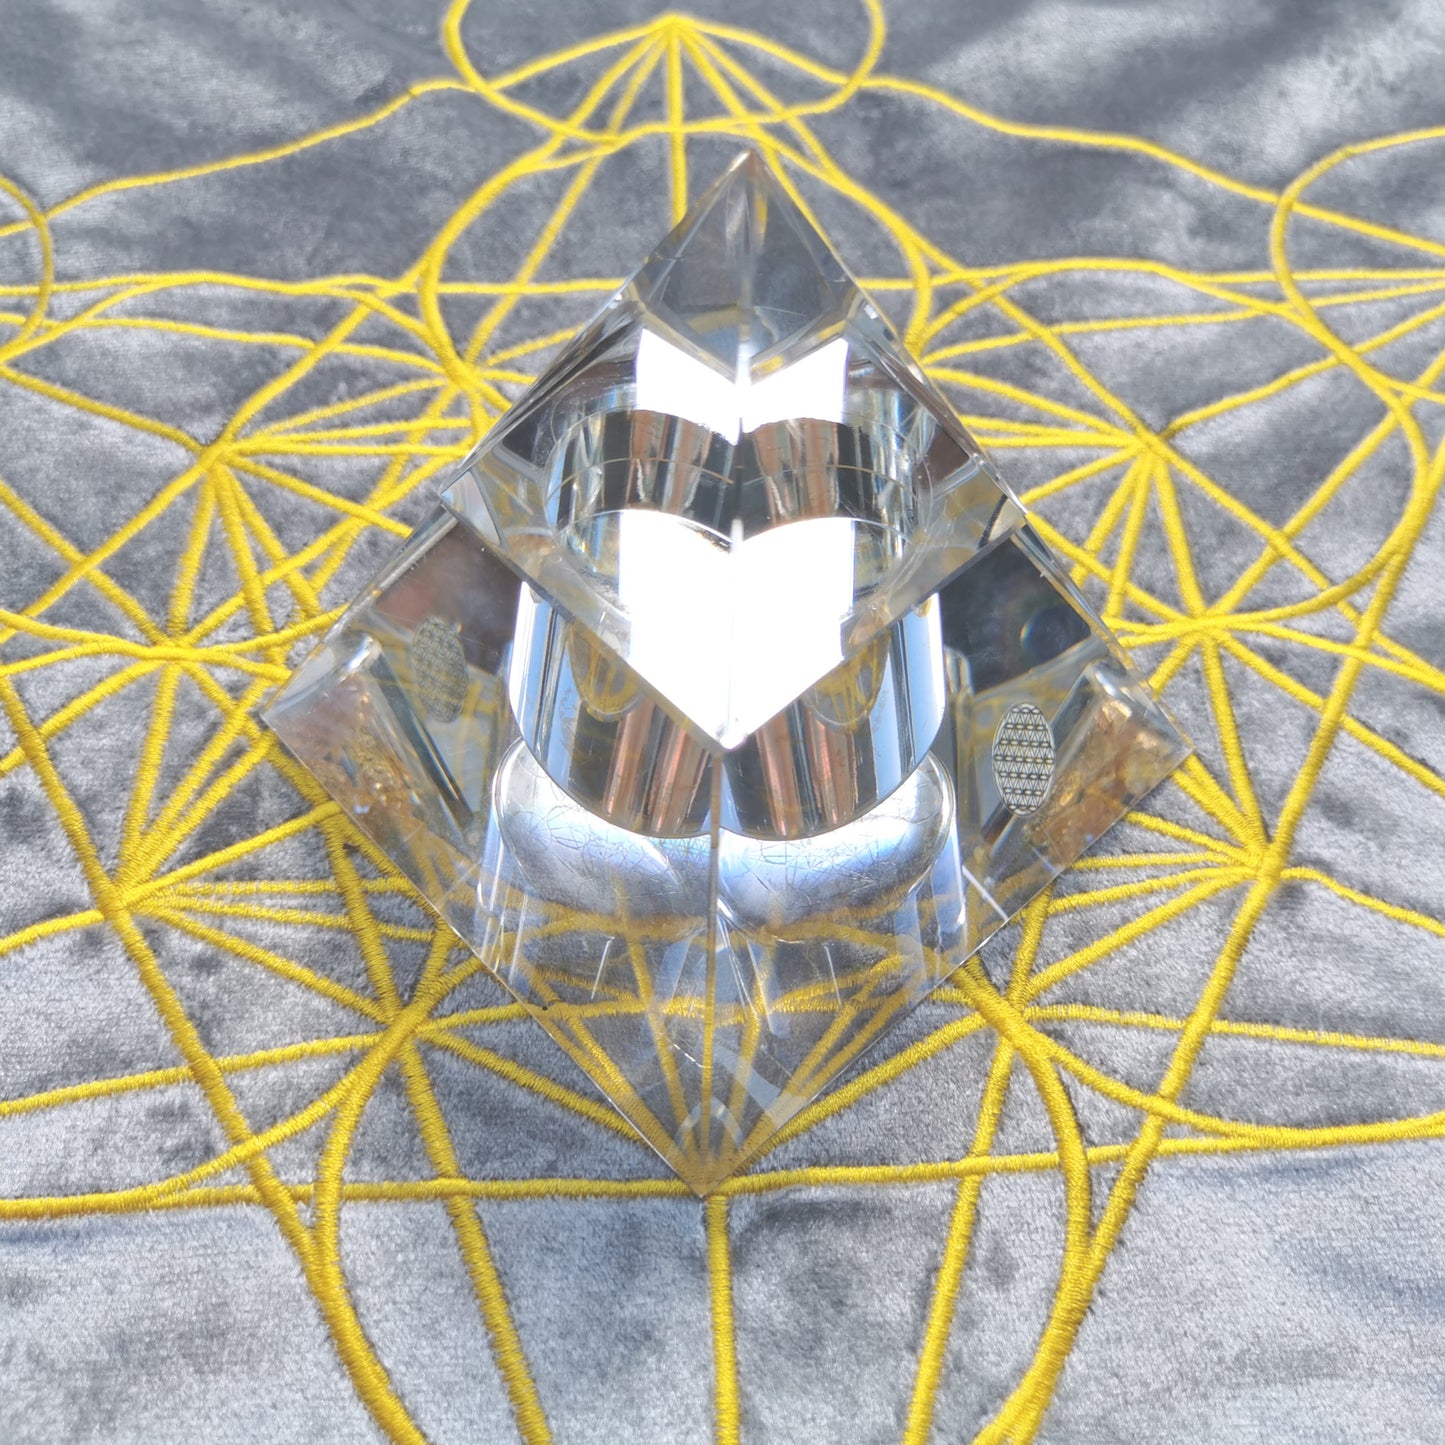 i-Geo Silver Metatron Mat for Crystals and i-Xing Pyramid